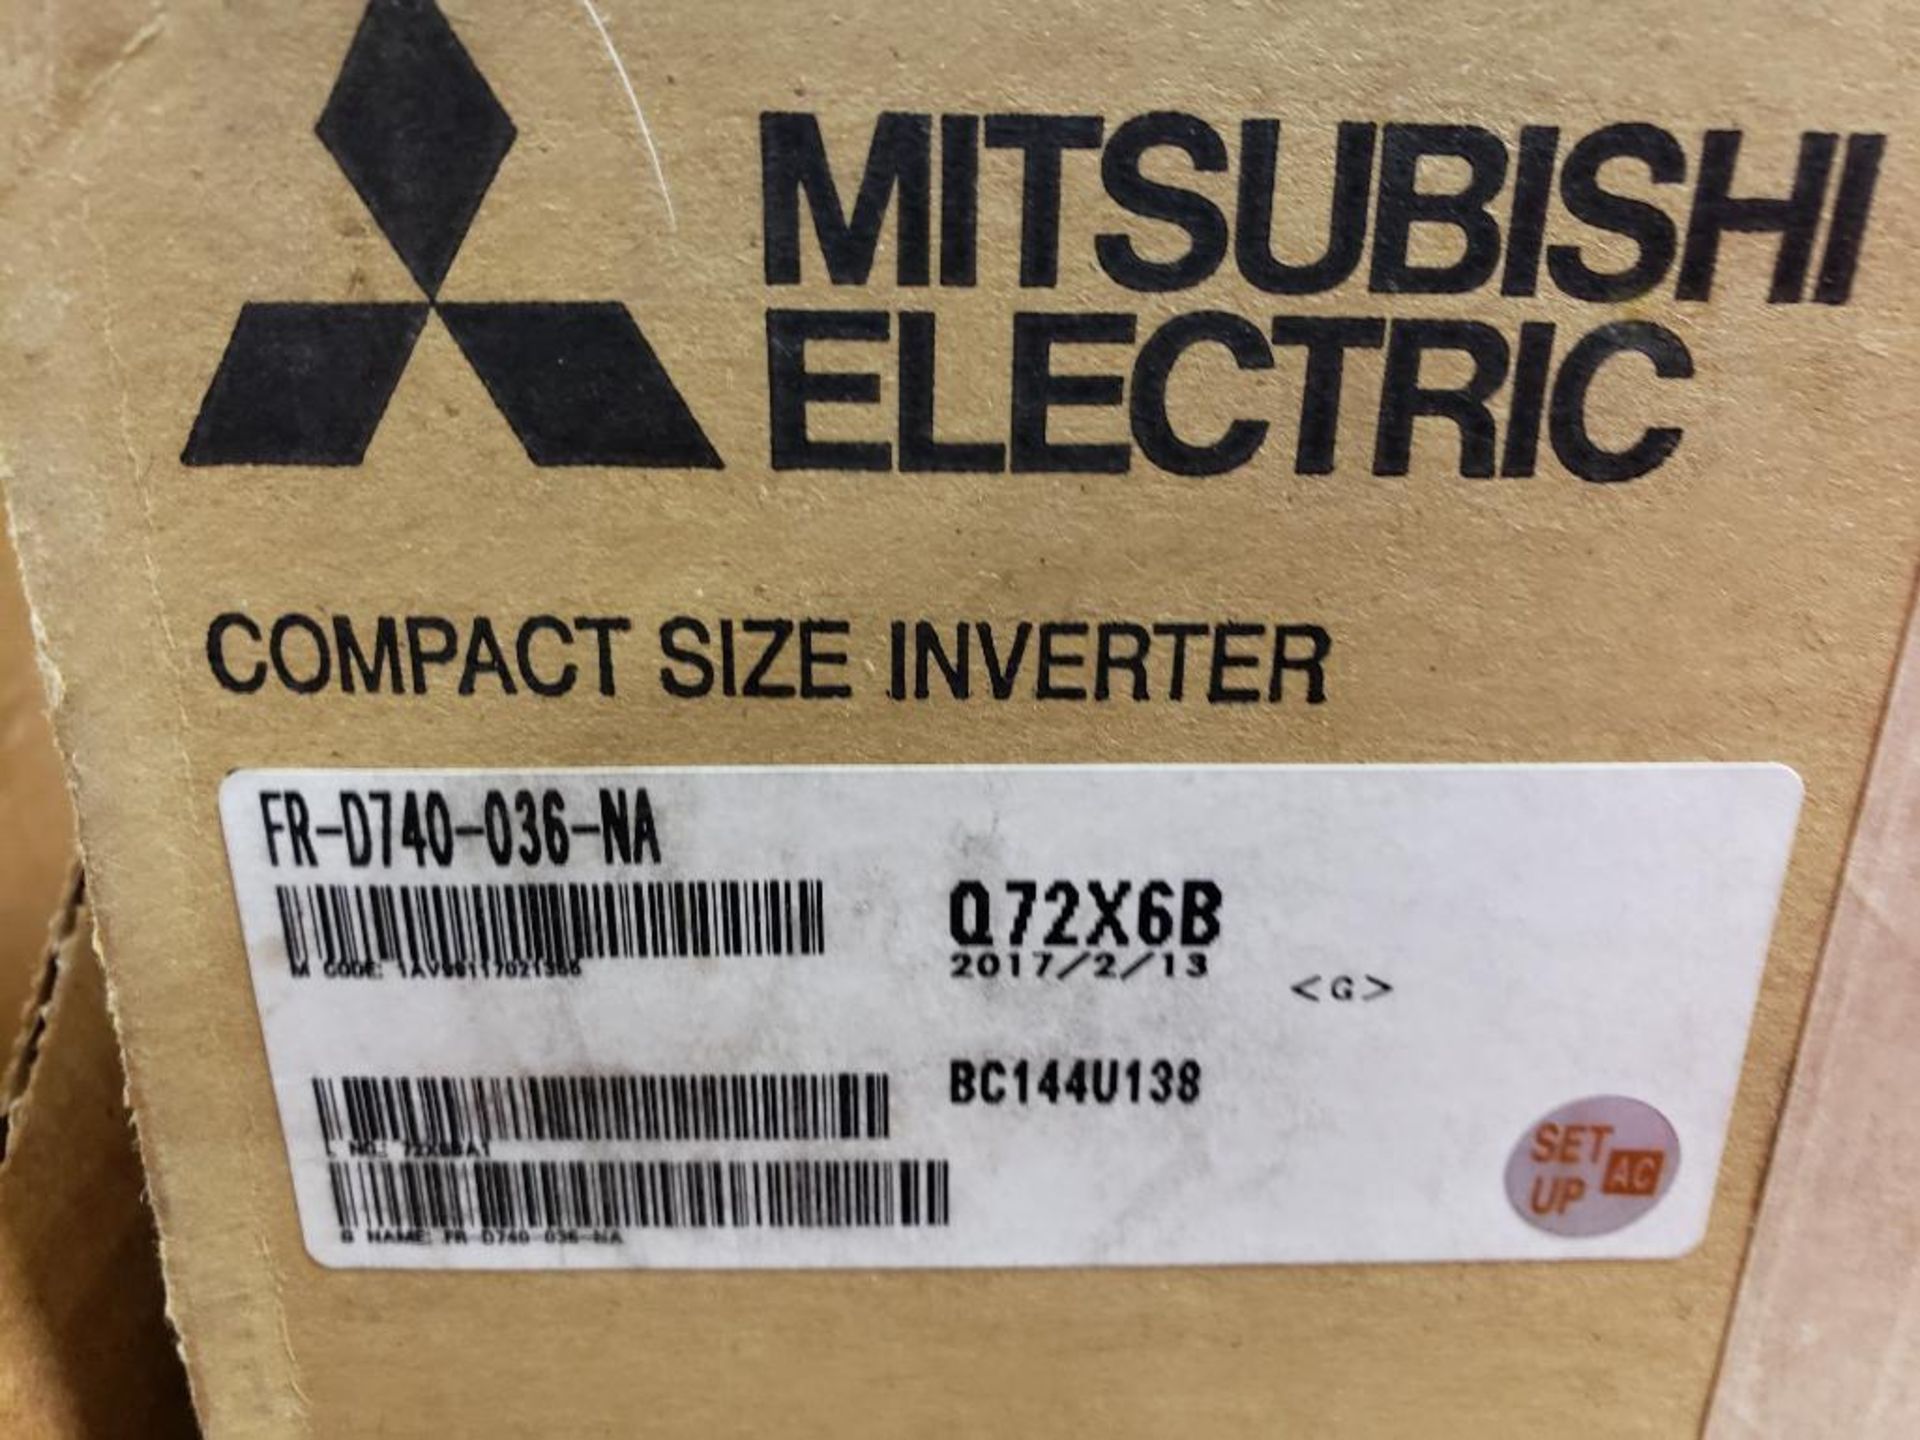 Mitsubishi Electric FR-D740-036-NA compact size inverter. New in box. - Image 2 of 5